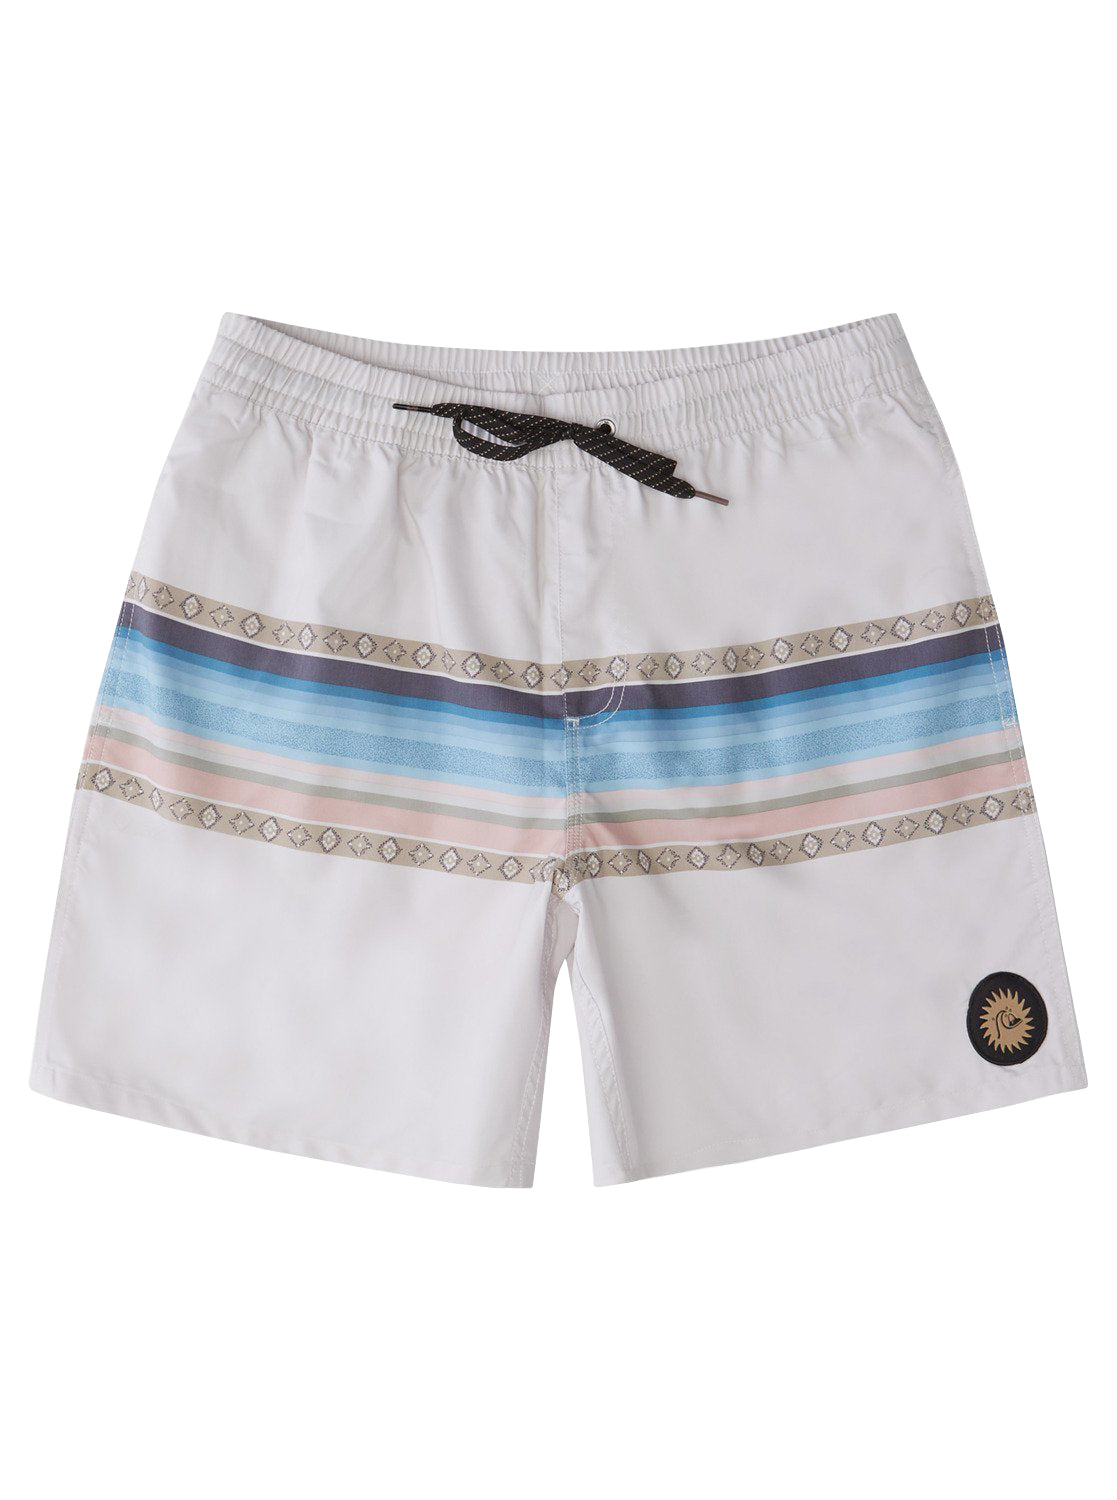 Quiksilver Sun Faded 17 Volley WCL6 XL